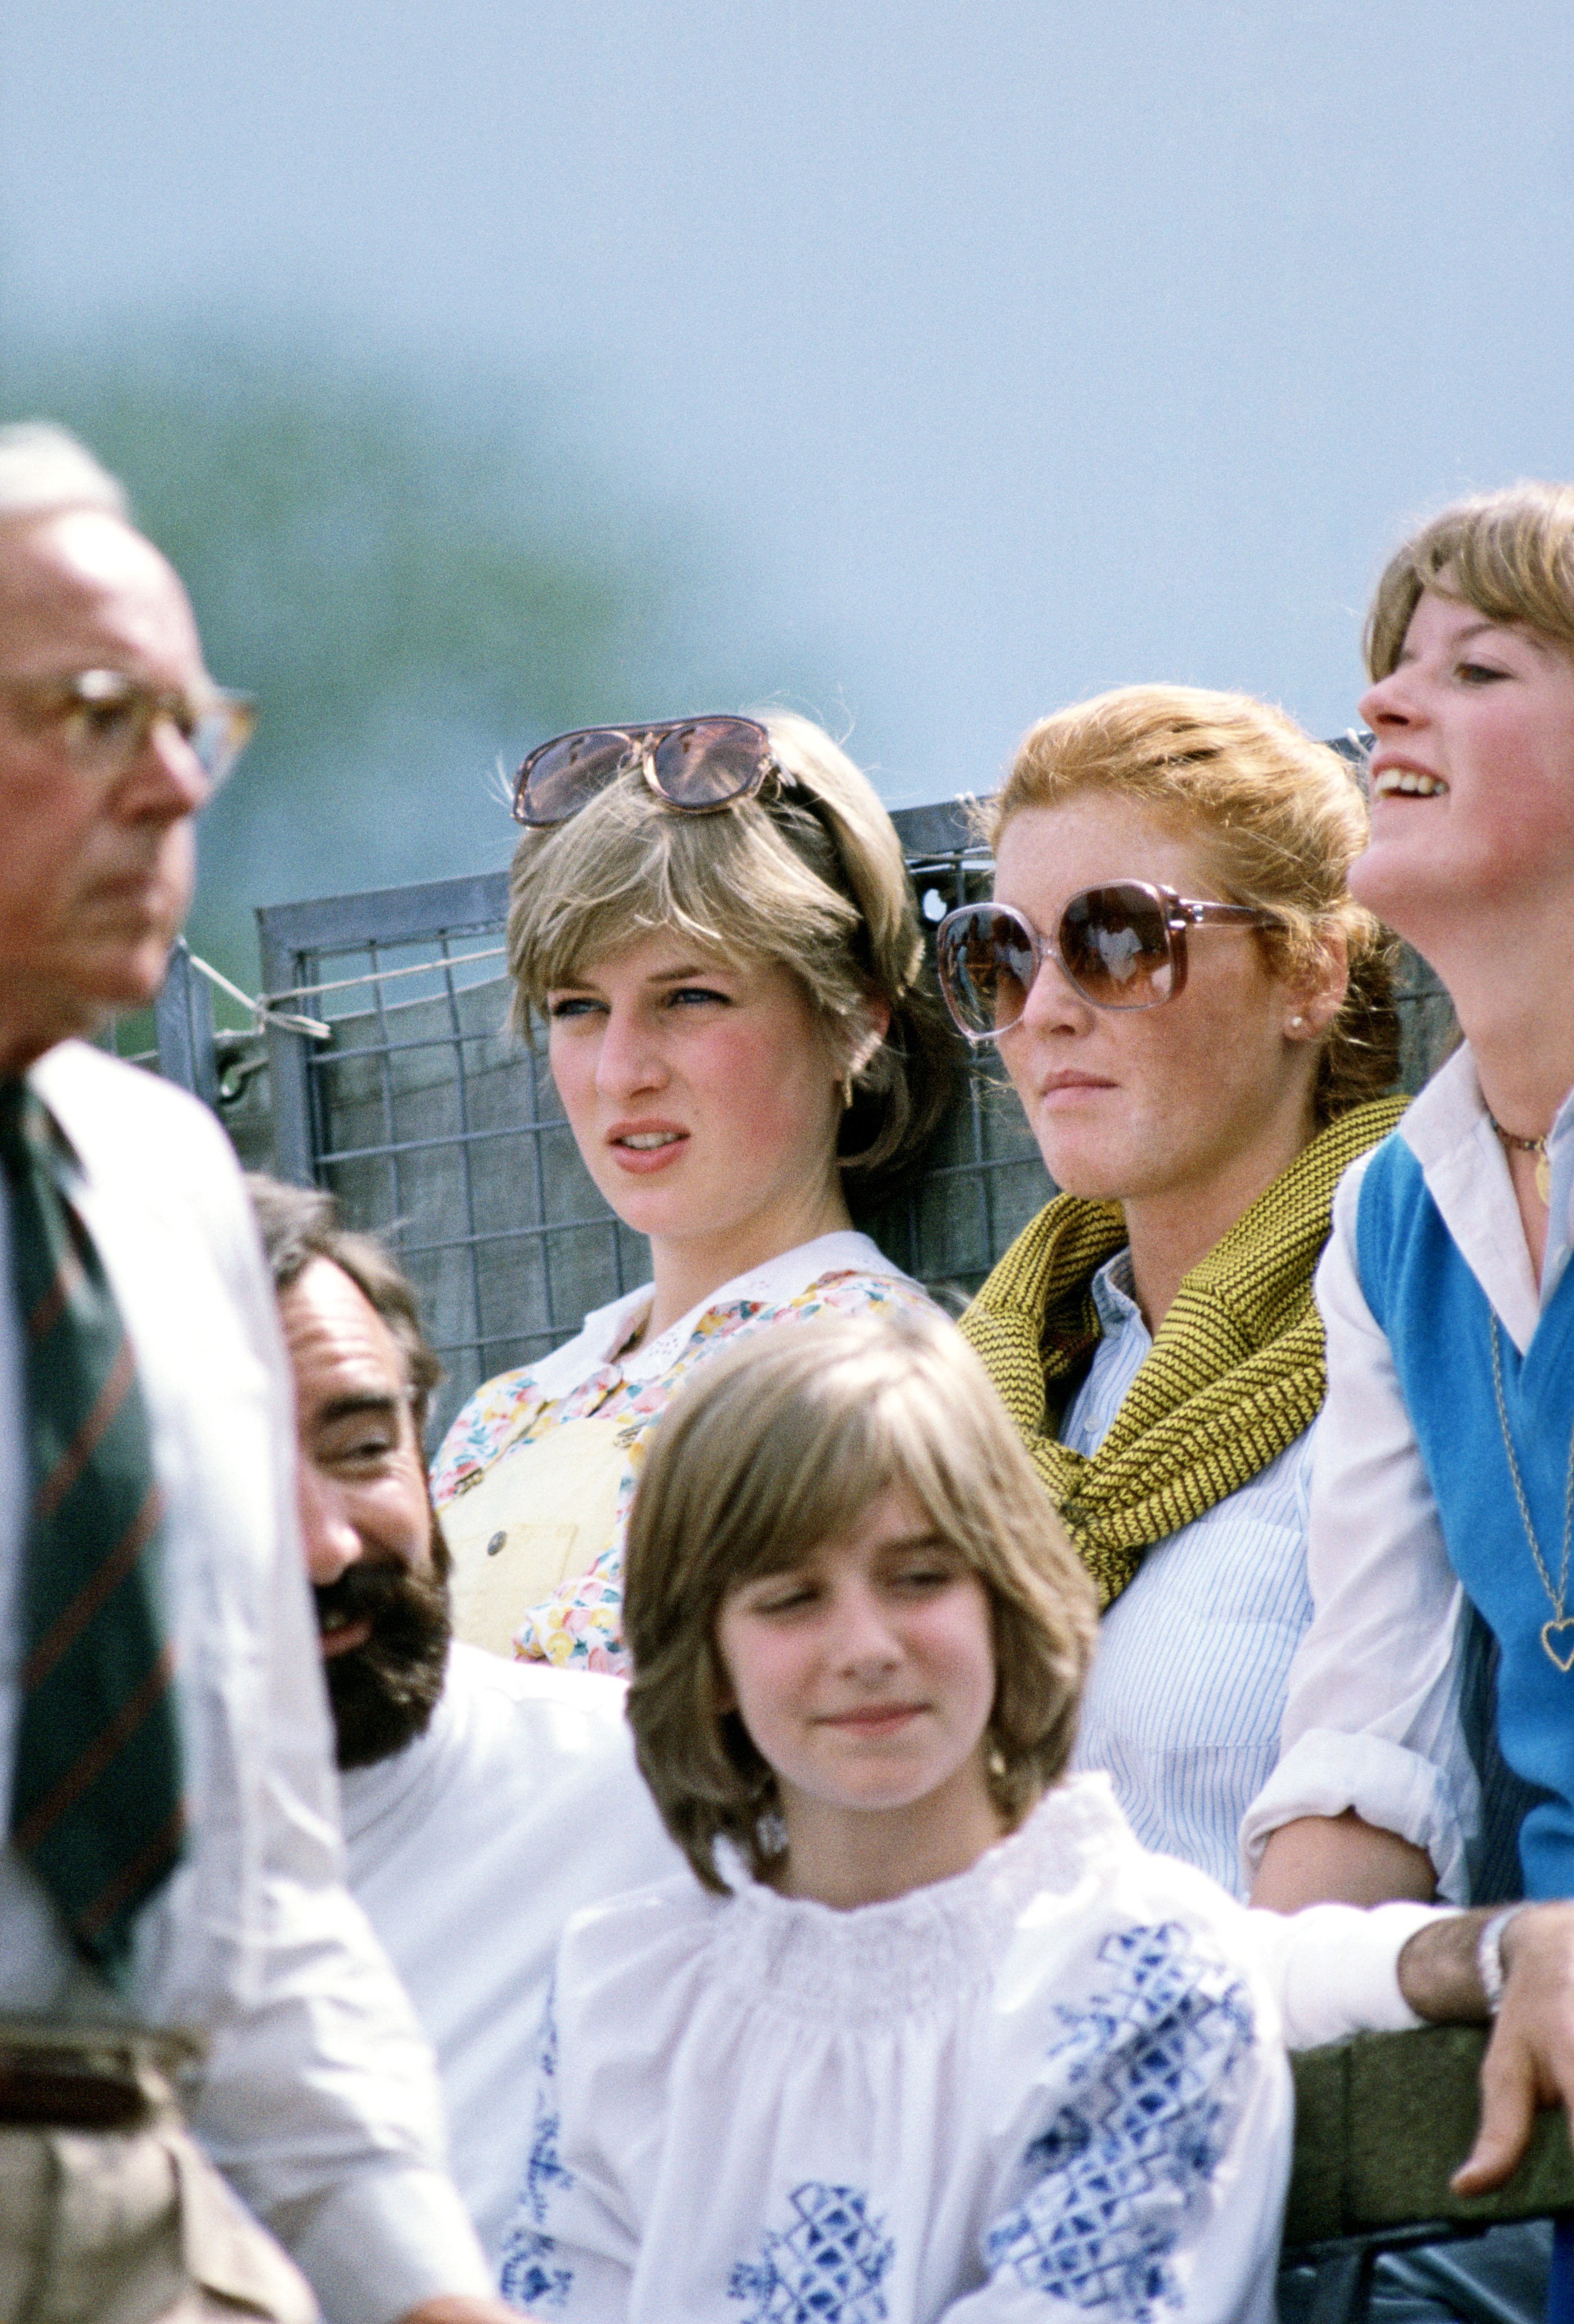 Sarah Ferguson and Lady Diana Spencer pictured watching Polo At Cowdray Park Polo Club in Cowdray, United Kingdom. / Source: Getty Images